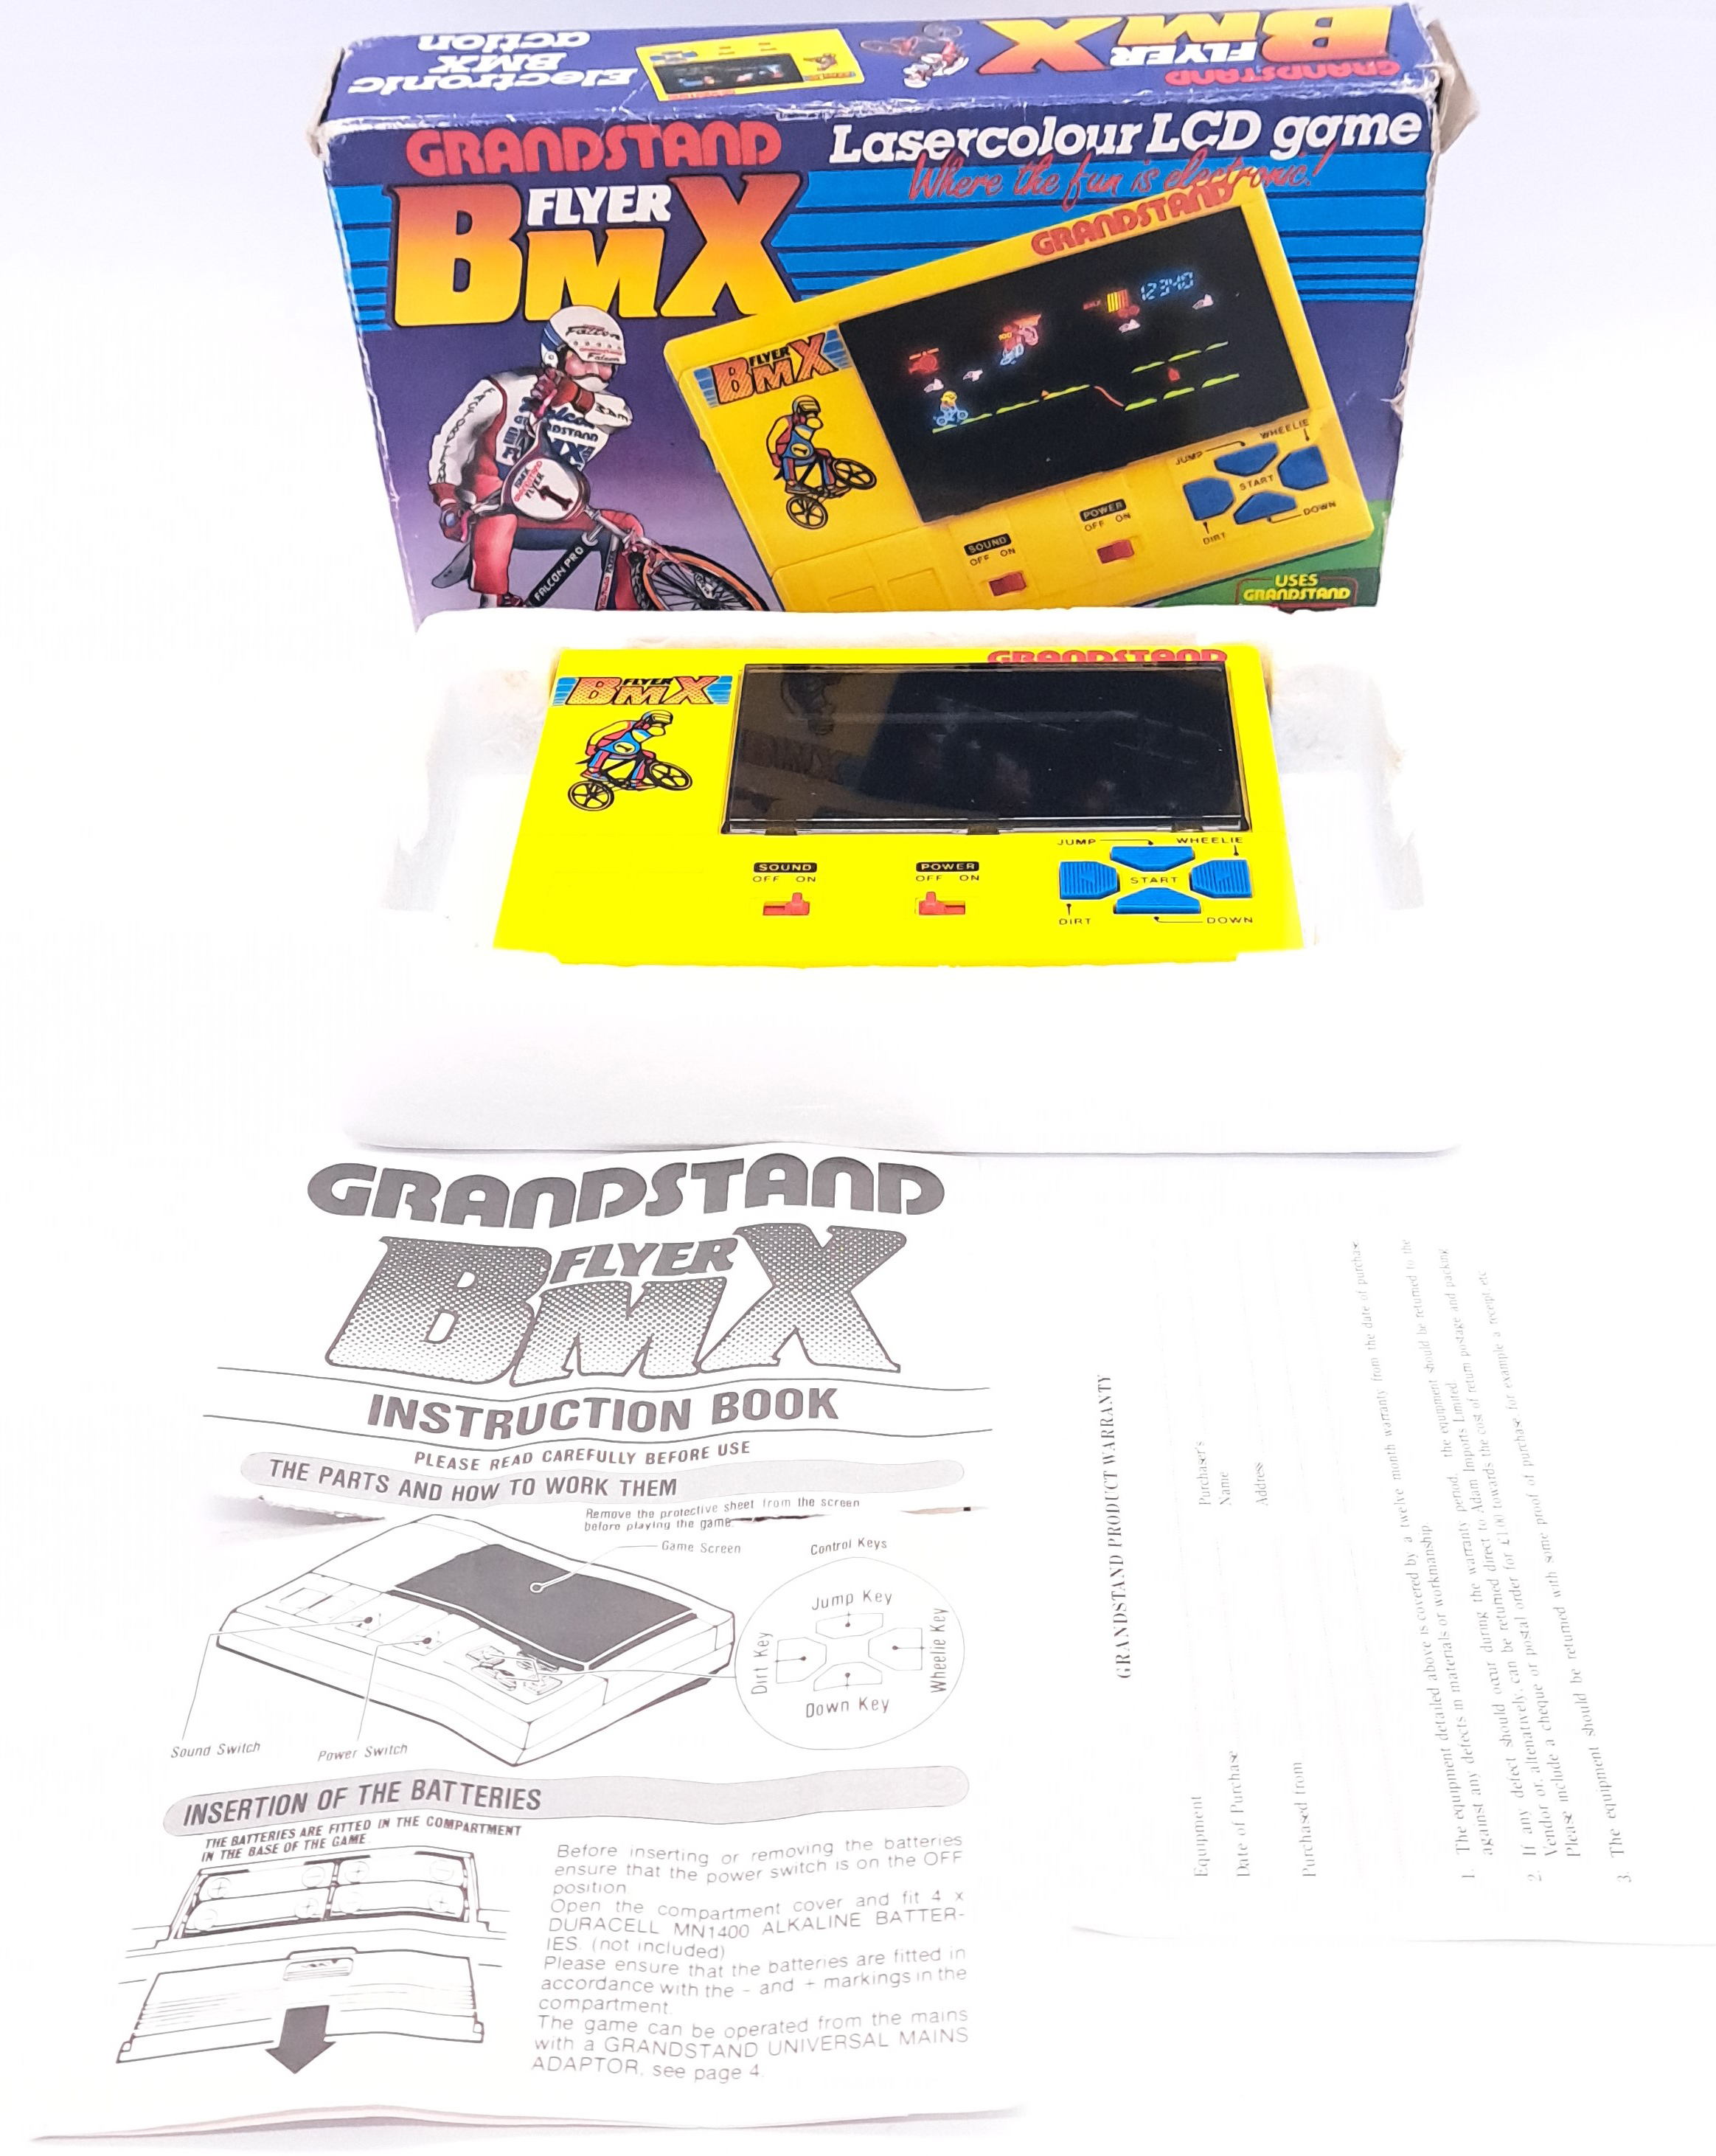 Vintage/Retro Gaming. Grandstand "BMX Flyer" 1983 Handheld  Lasercolour Game Console - Image 5 of 6